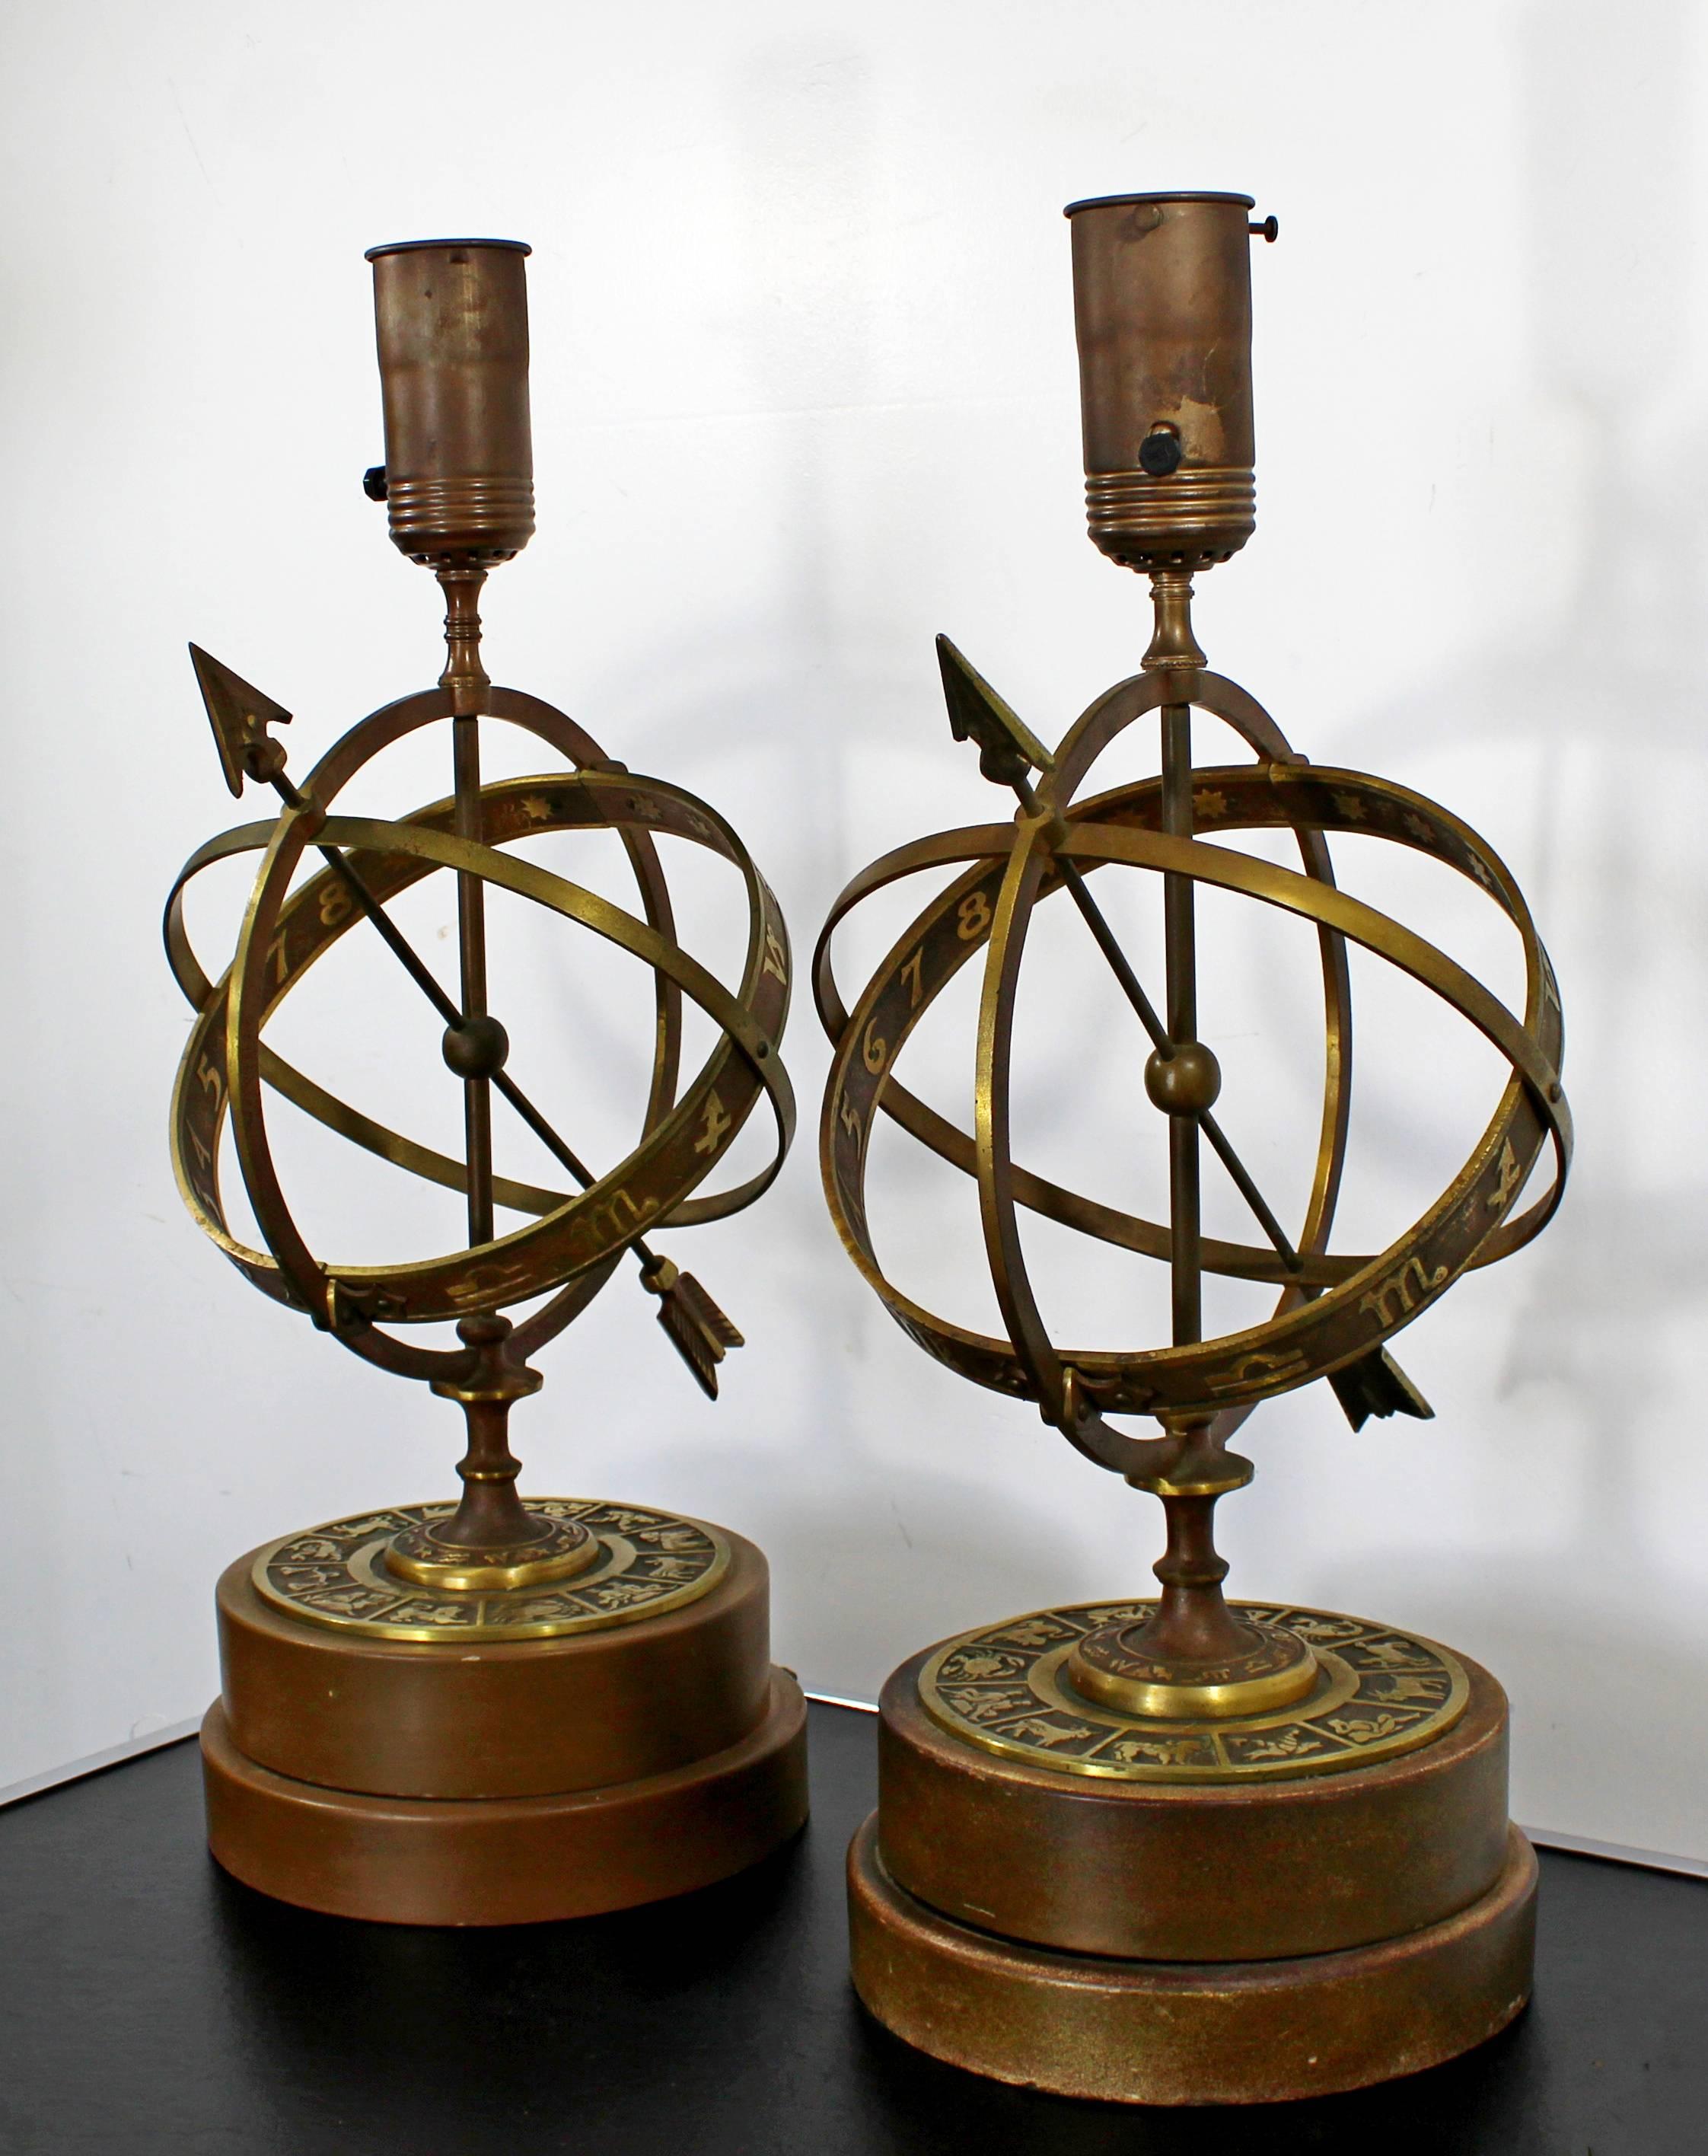 For your consideration is a Classic pair of astrological, armillary sphere table lamps, depicting zodiac signs, by Frederick Cooper, circa 1960s. These beautiful lamps are constructed of copper-plated iron with a solid turned wooden base. In very